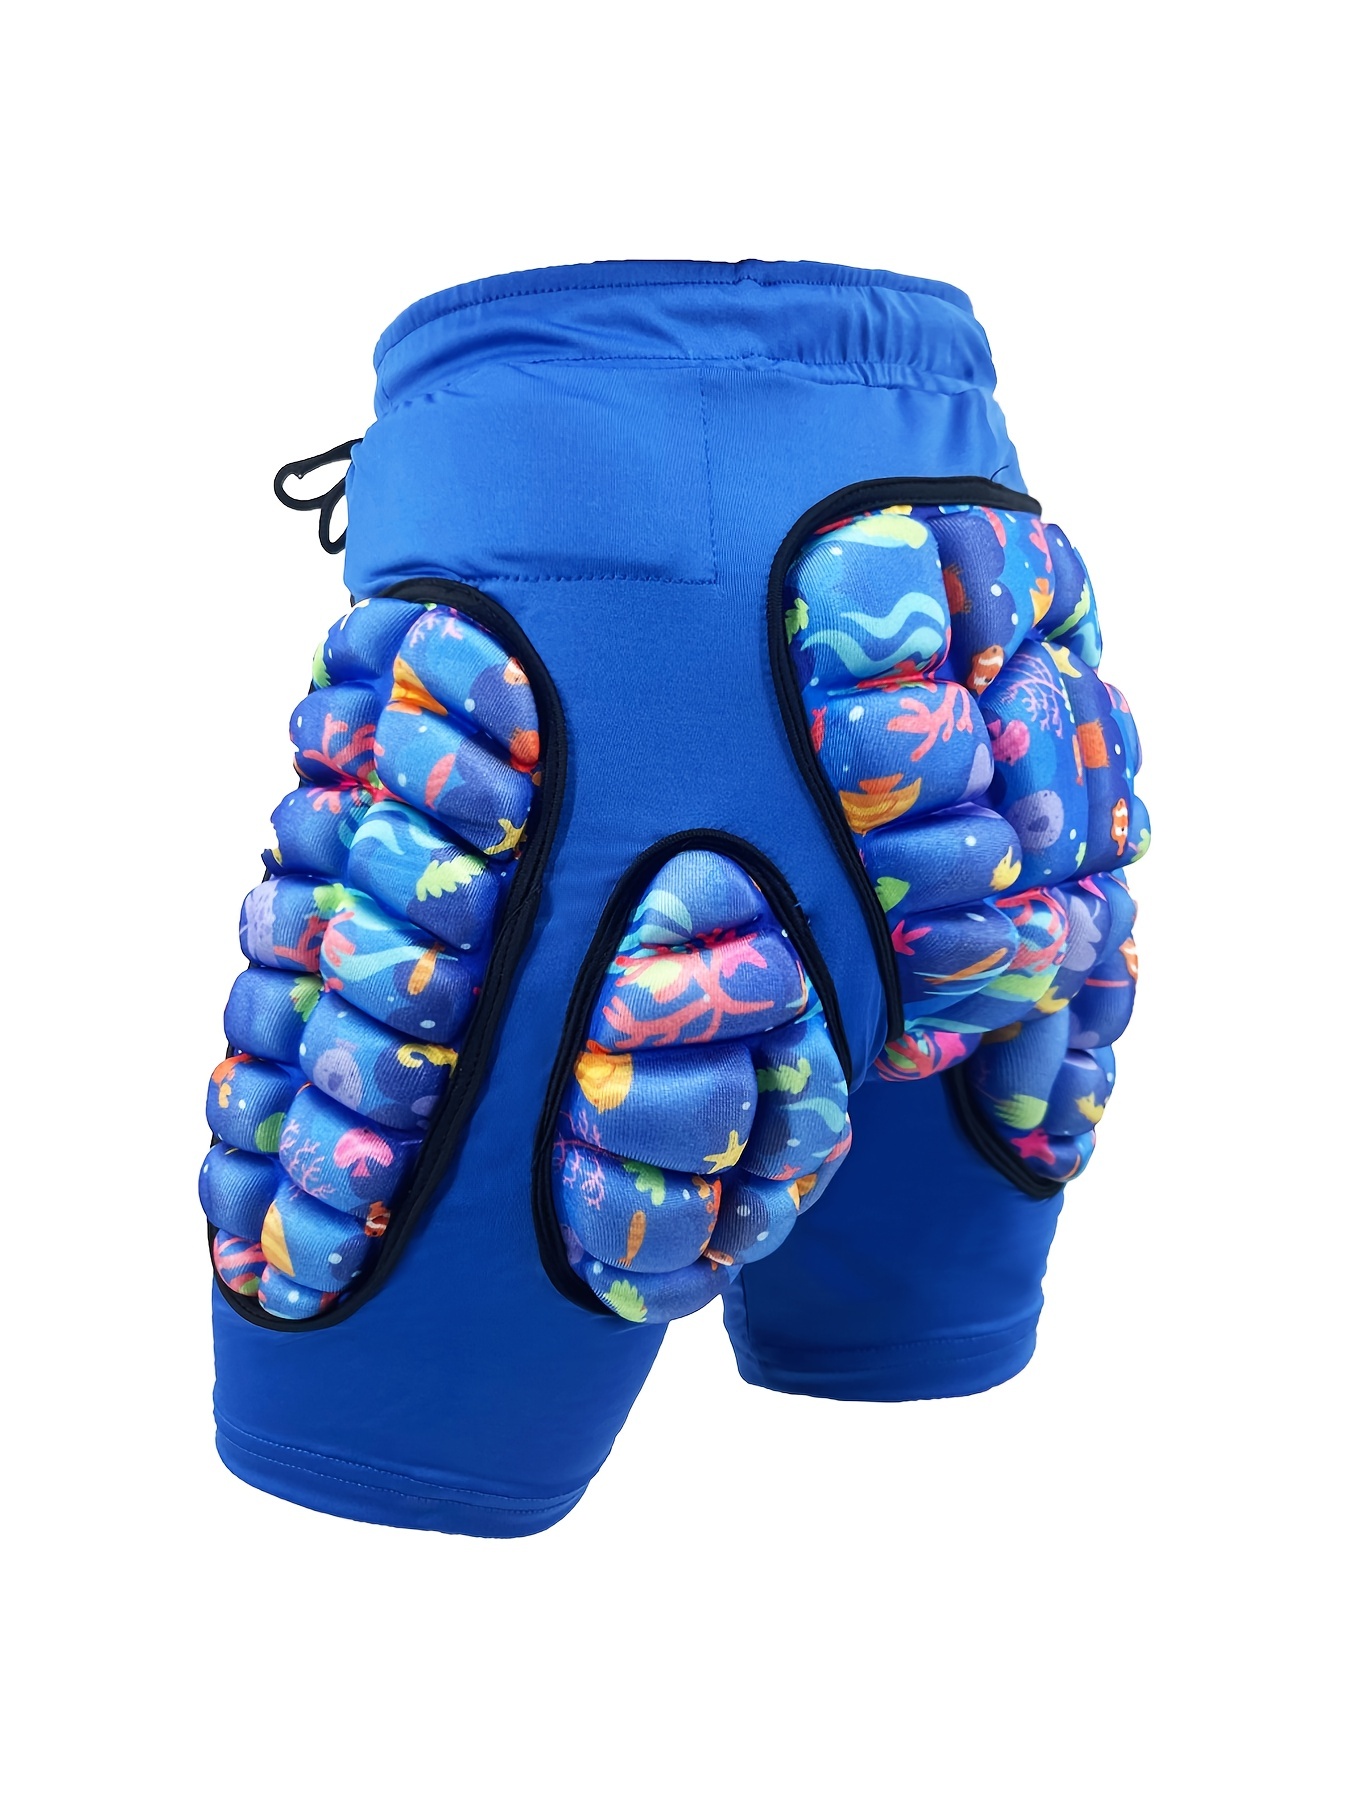 Padded Shorts Protective Crash Pants Tailbone Hip Butt Pads for